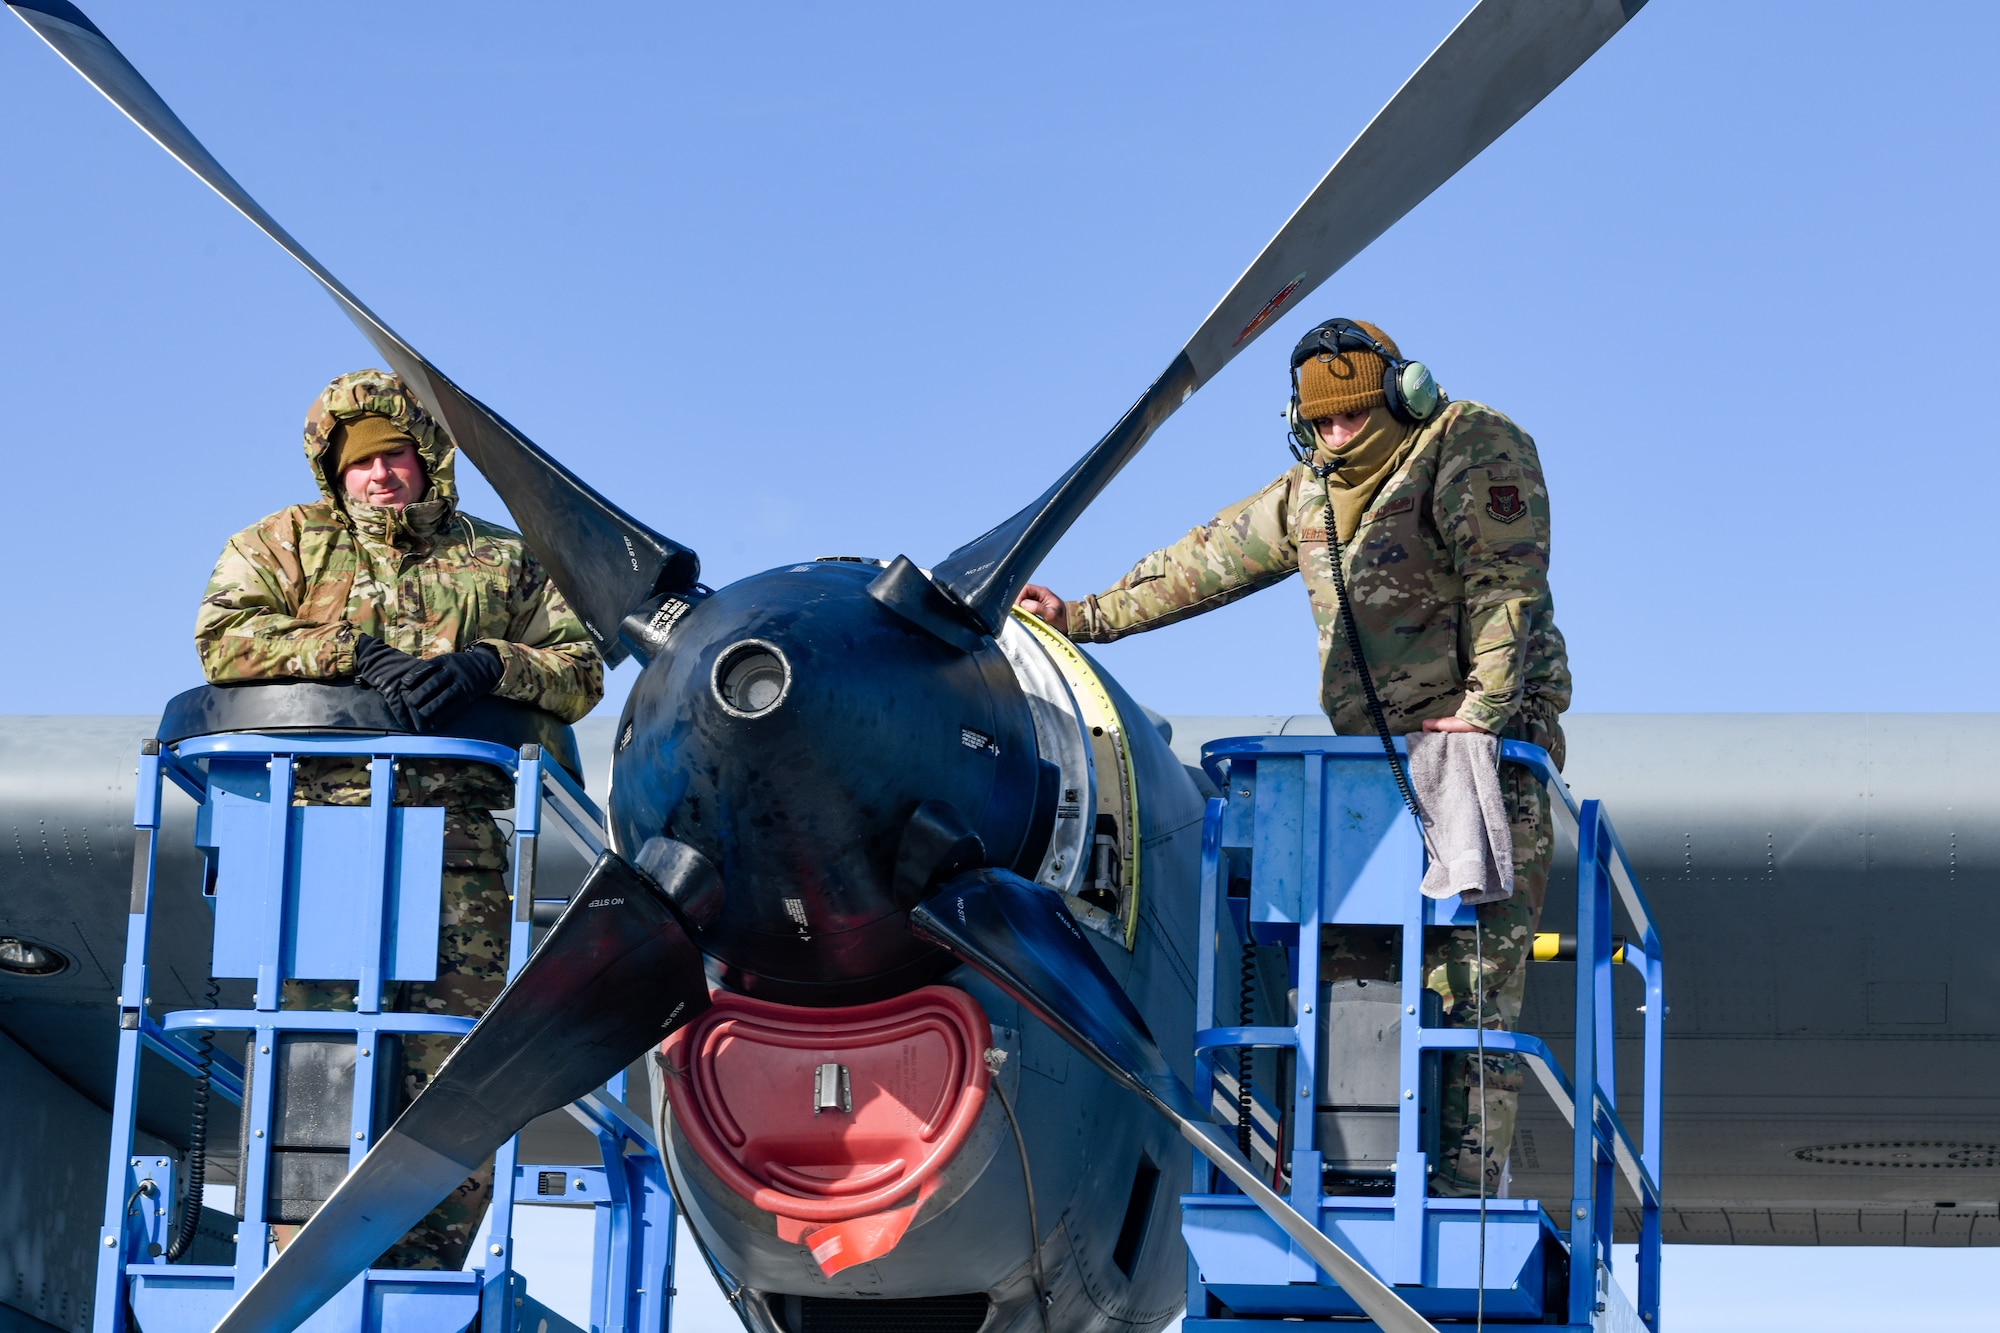 Senior Airman Anthony Bianco and Staff Sgt. Anthony Verterano, aerospace propulsion technicians assigned to the 910th Aircraft Maintenance Squadron, confirm propeller lock positions, Jan. 17, 2023, at Mountain Home Air Force Base, Idaho.